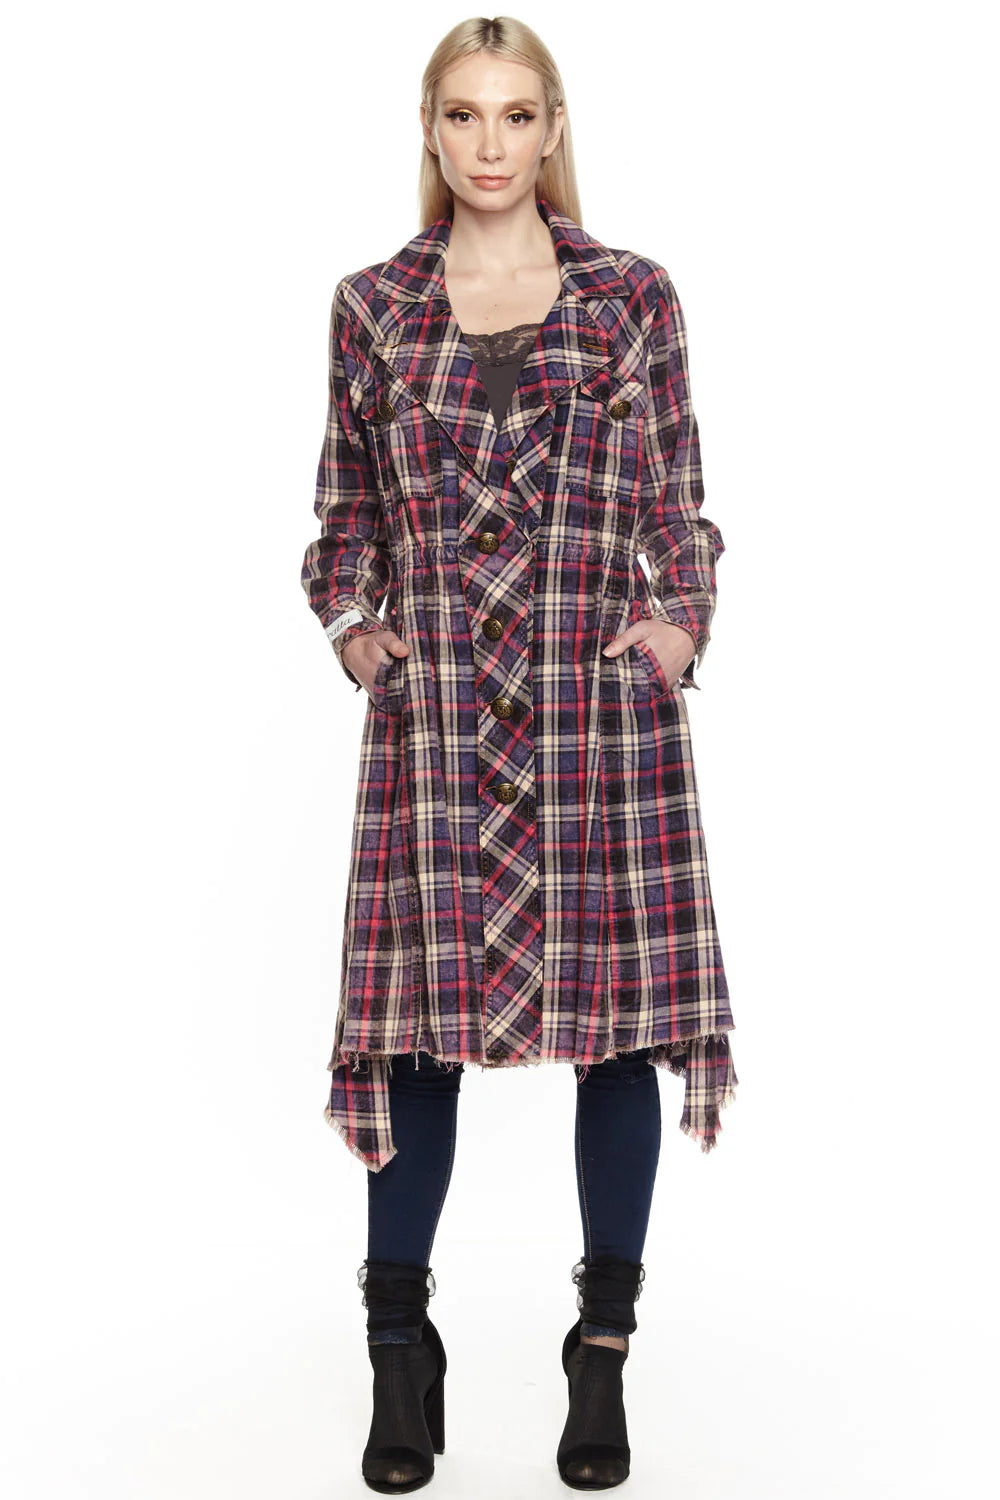 SALE My Choice Plaid Button Trench Coat